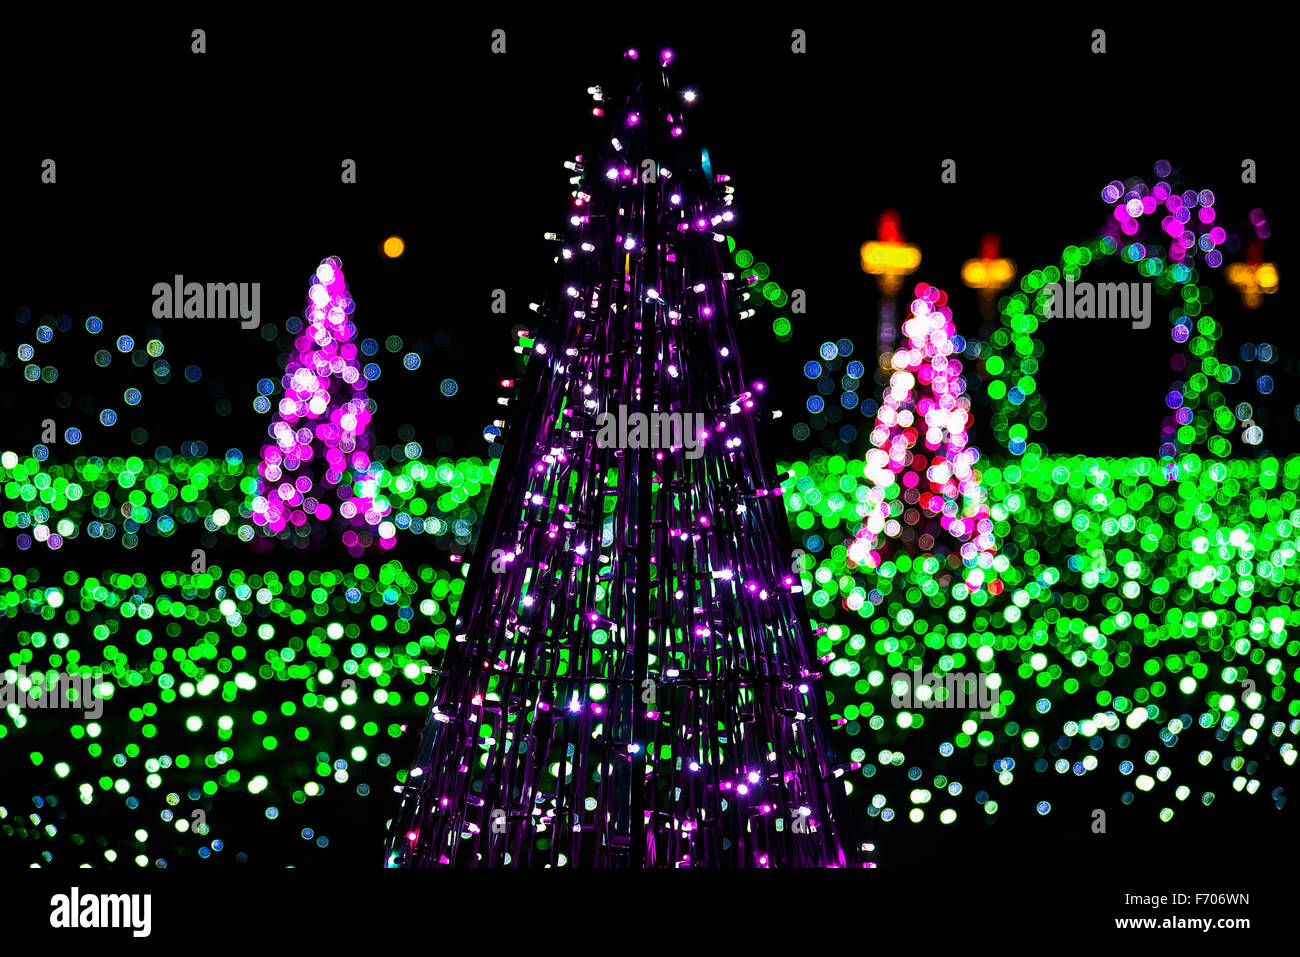 Christmas Tree made from Garlands with Colorful Lights in Background Stock Photo